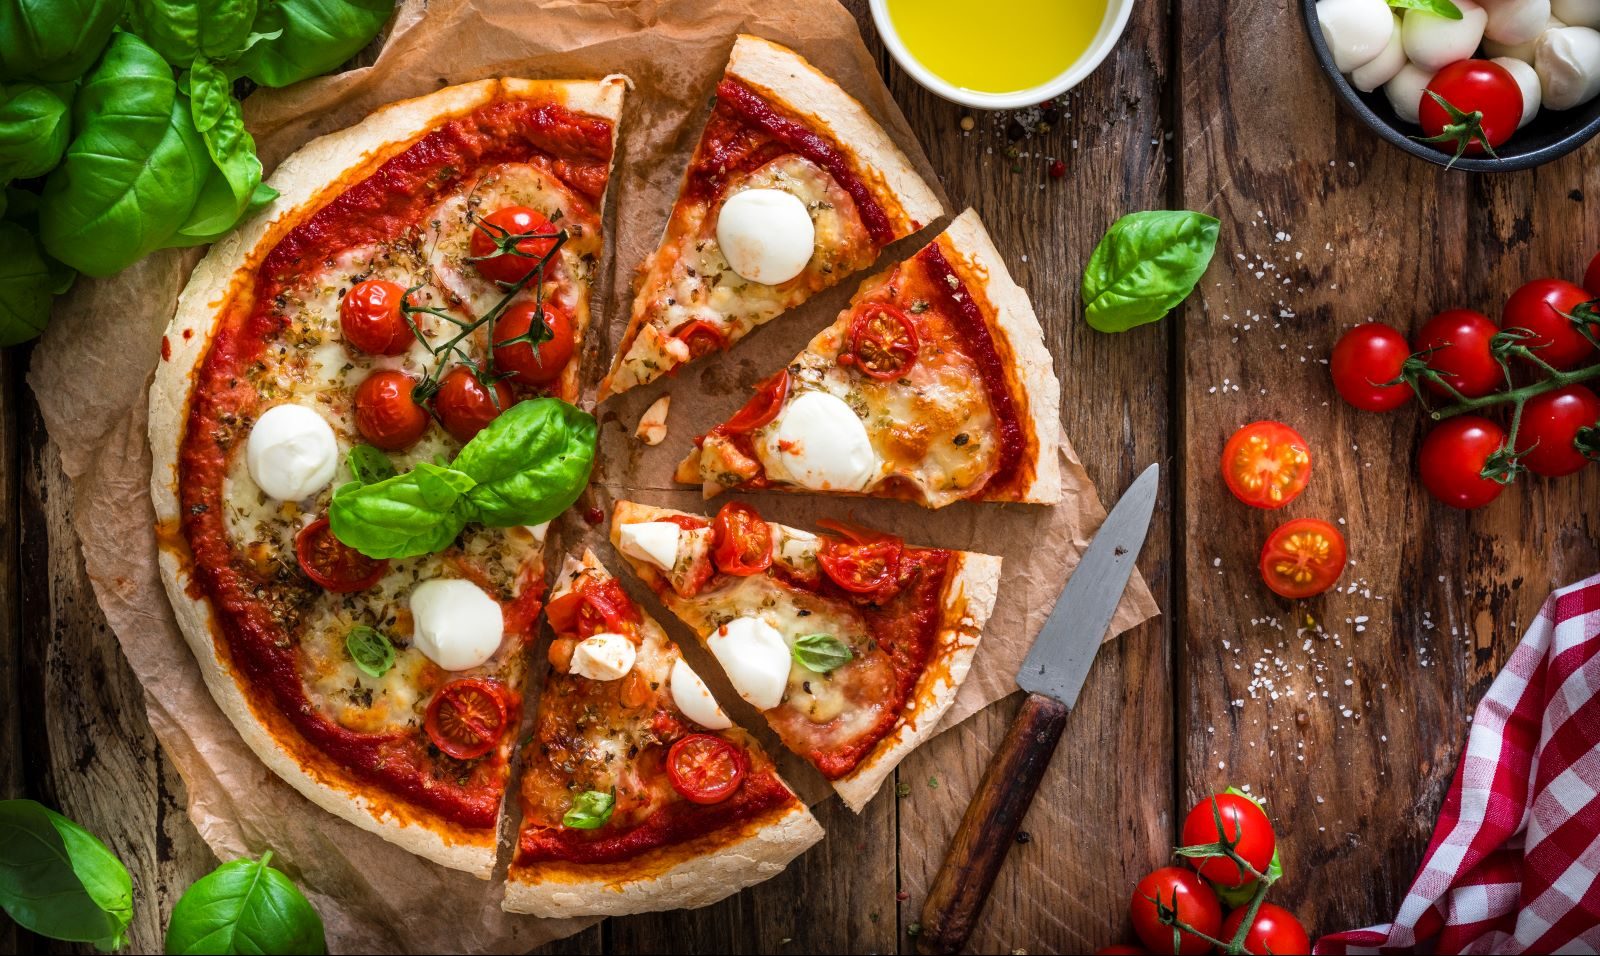 A dietitian breaks down the healthiest pizza toppings, sauces and crusts so that pizza can live on in your diet.